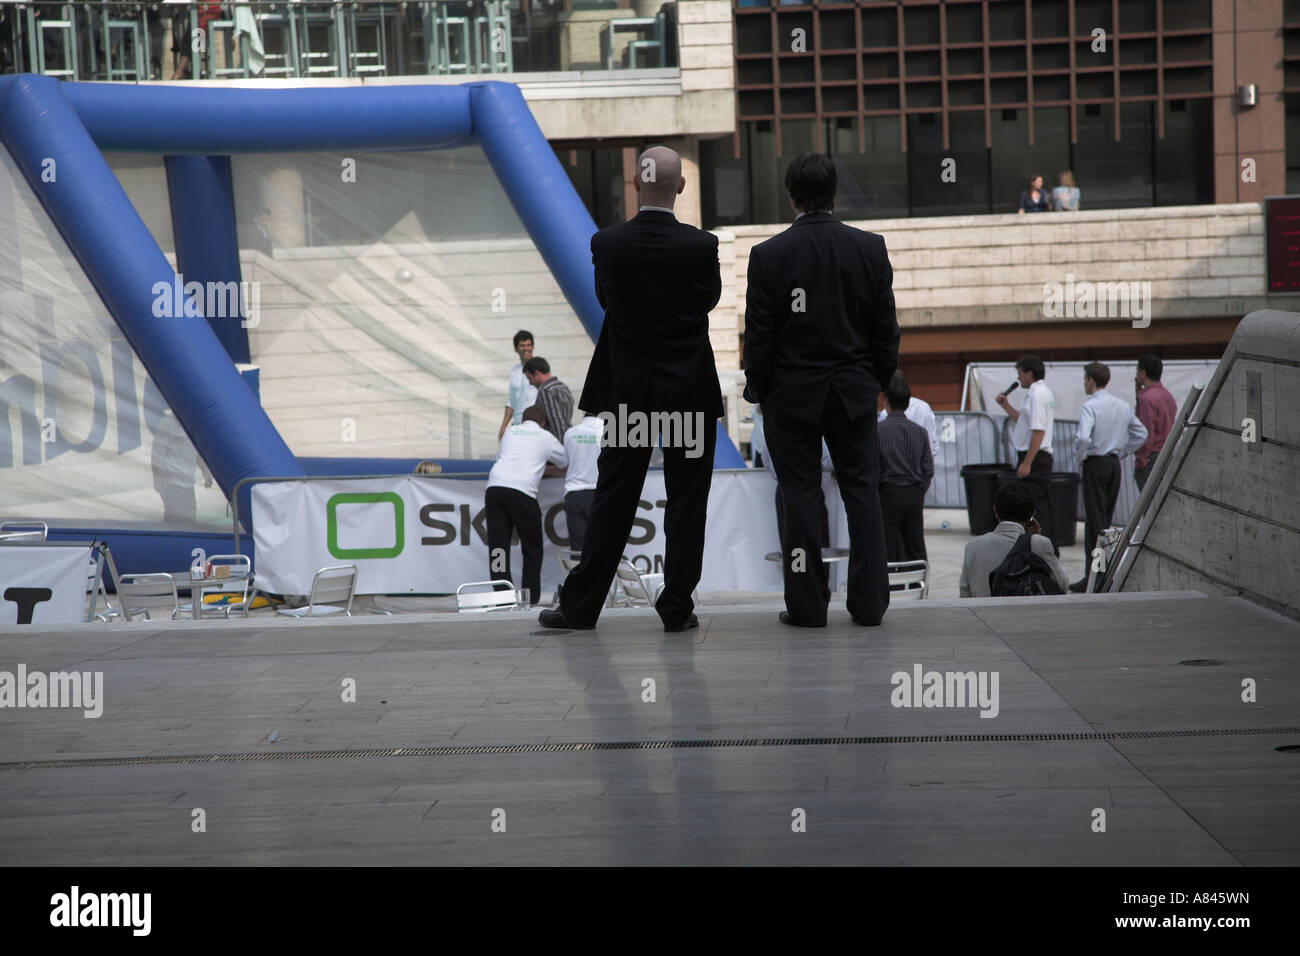 Two men in suits watching football entertainment show Broadgate Circus, City of London, England Stock Photo